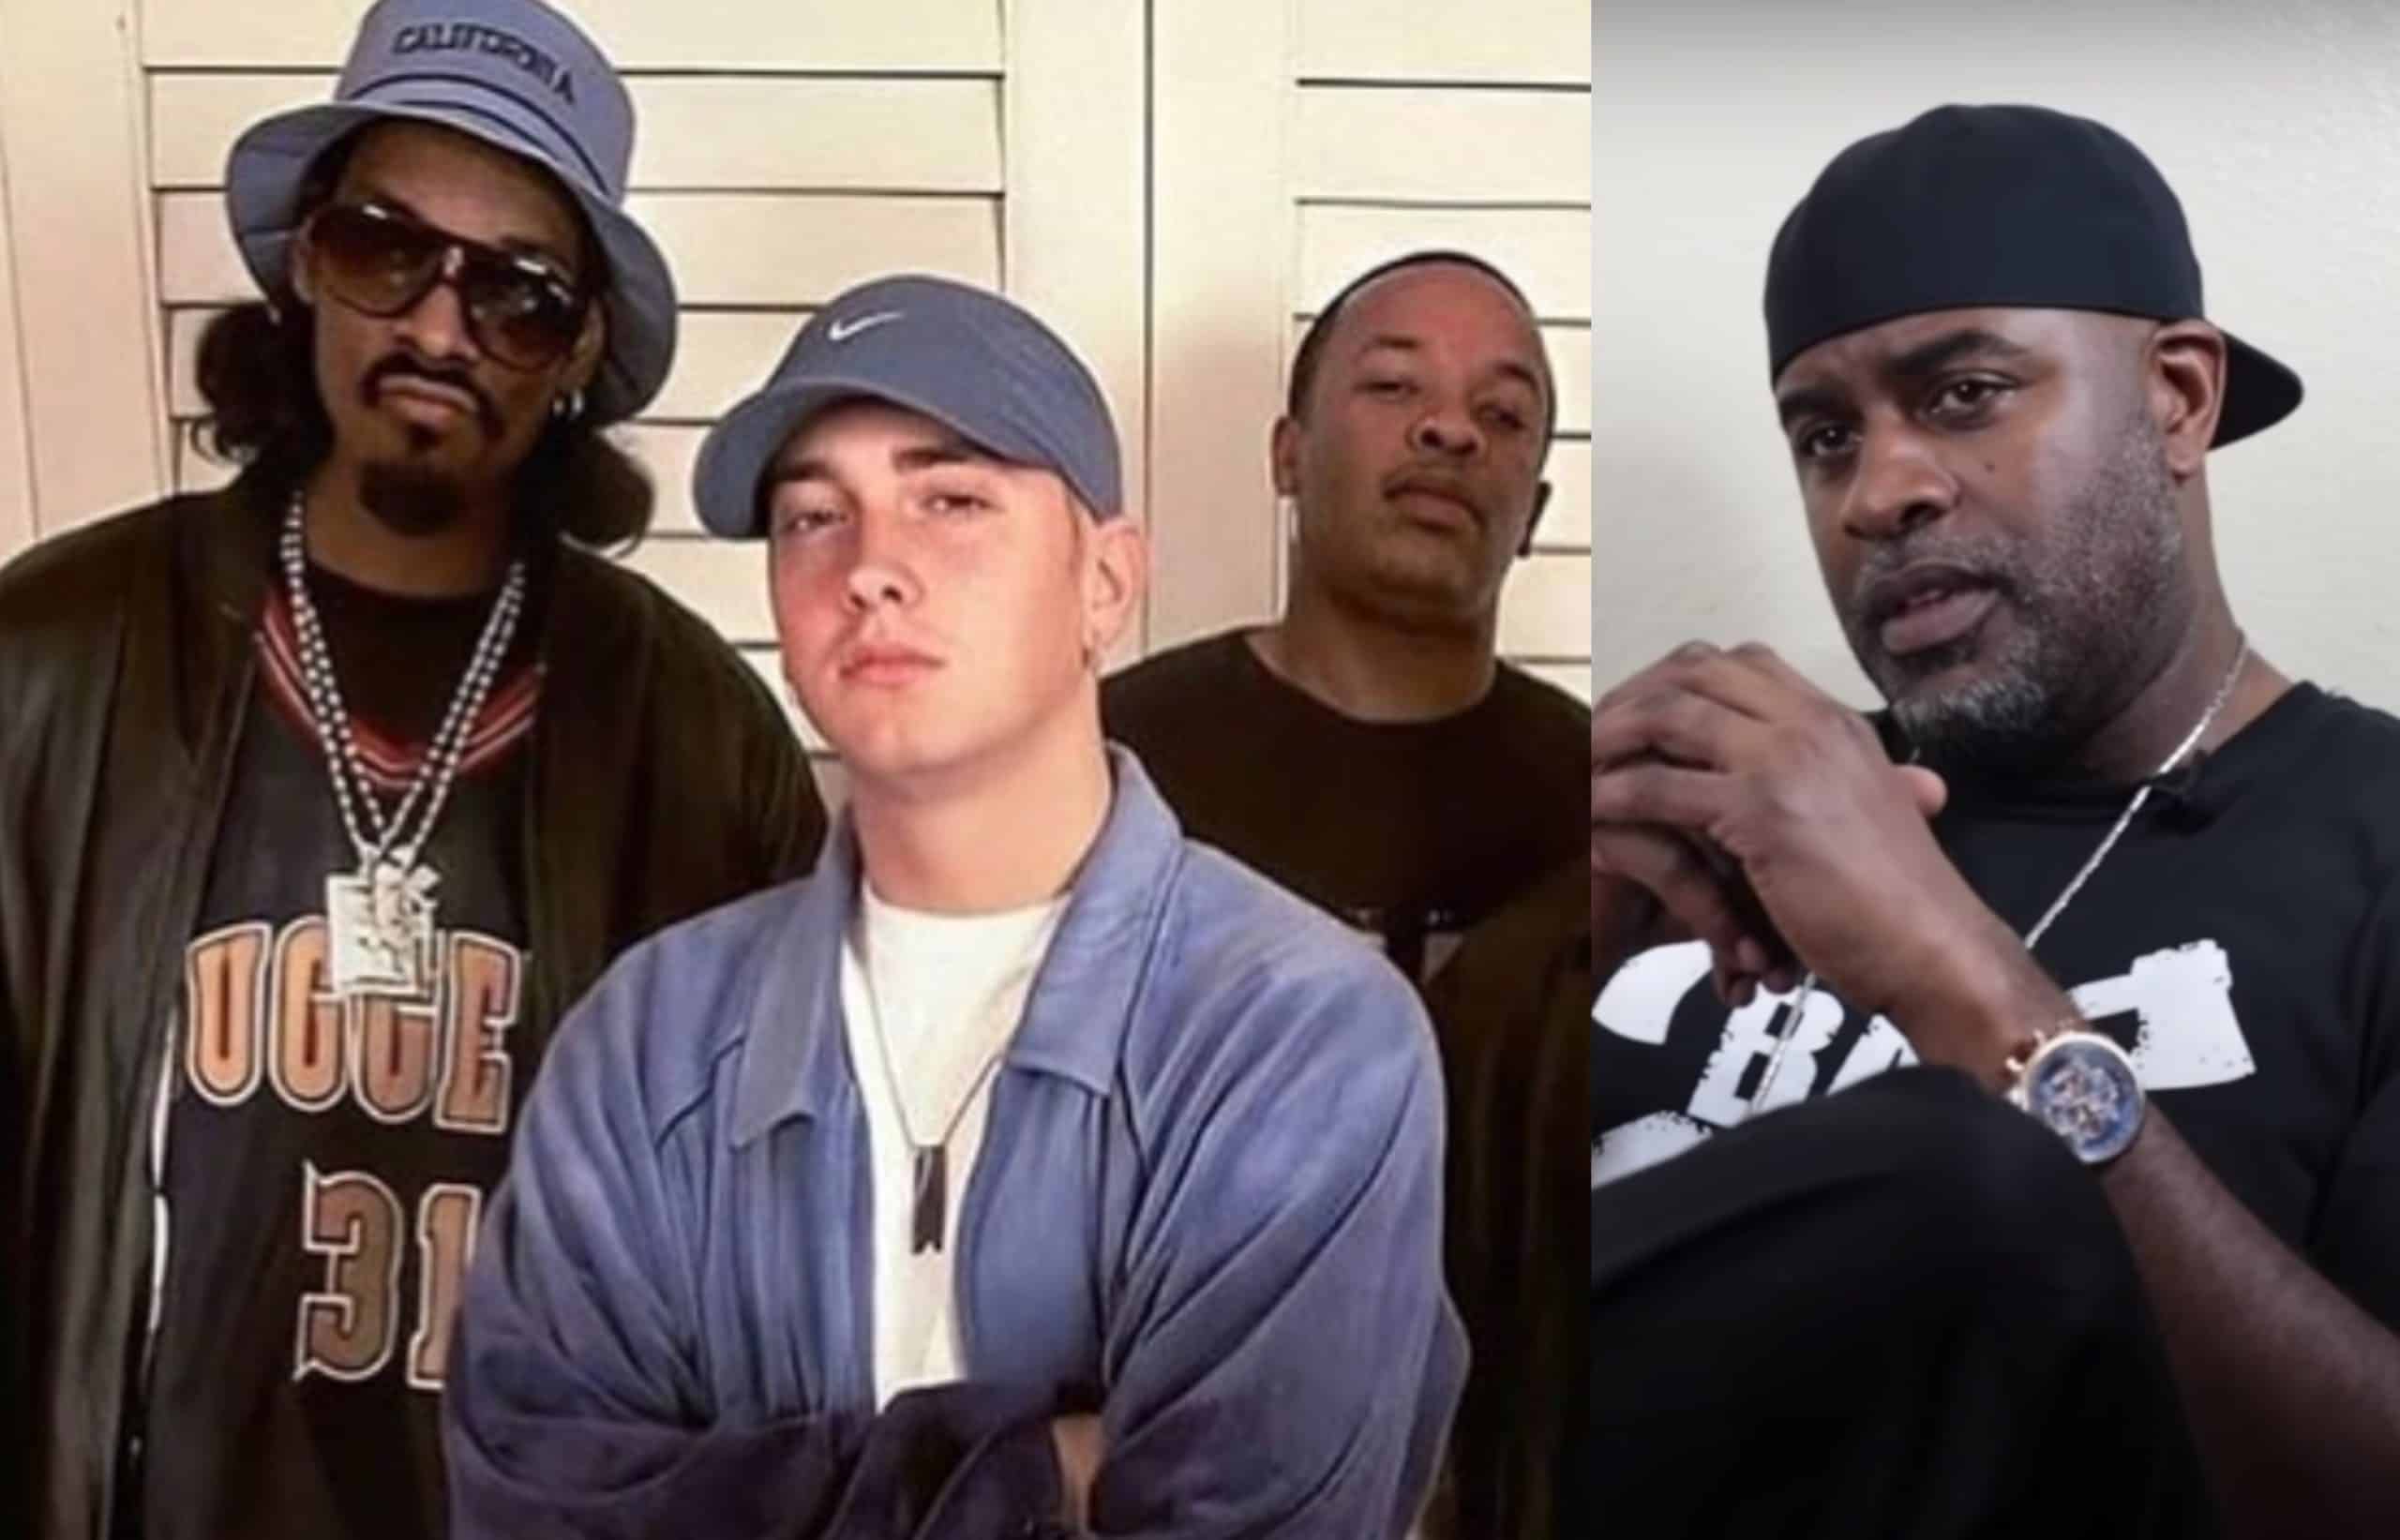 Big Naz Reveals Suge Knight Sent Death Row Goons For Eminem, Dr. Dre & Snoop Dogg in Hawaii